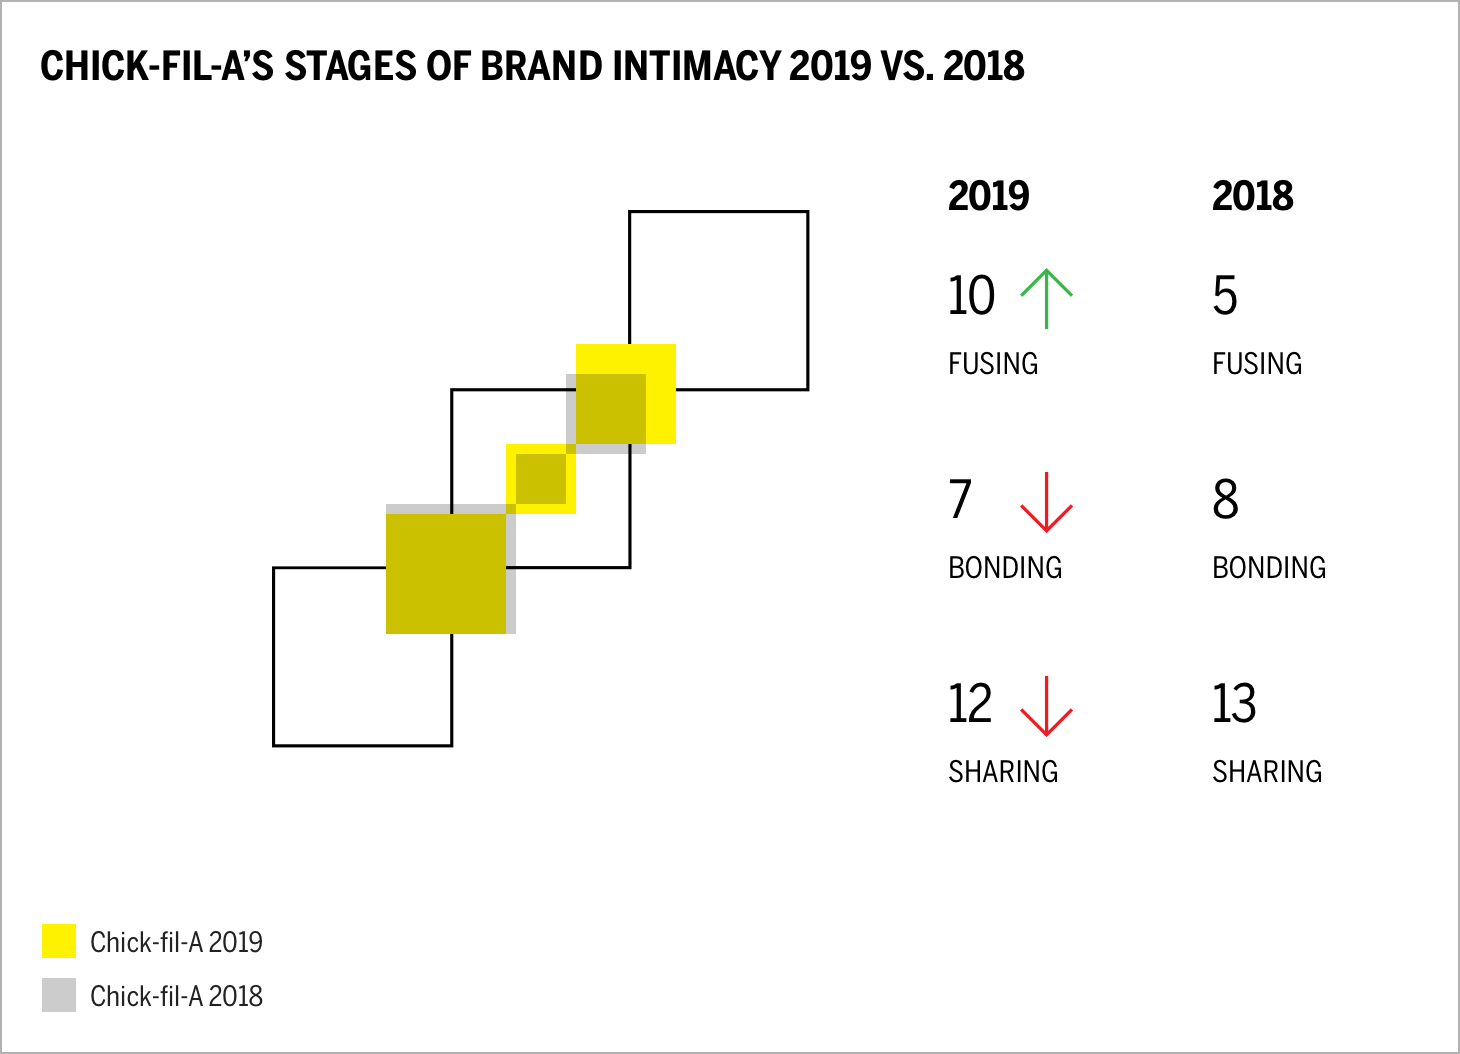 Chick-fil-a's Stages of Brand Intimacy 2019 vs. 2018 Chart